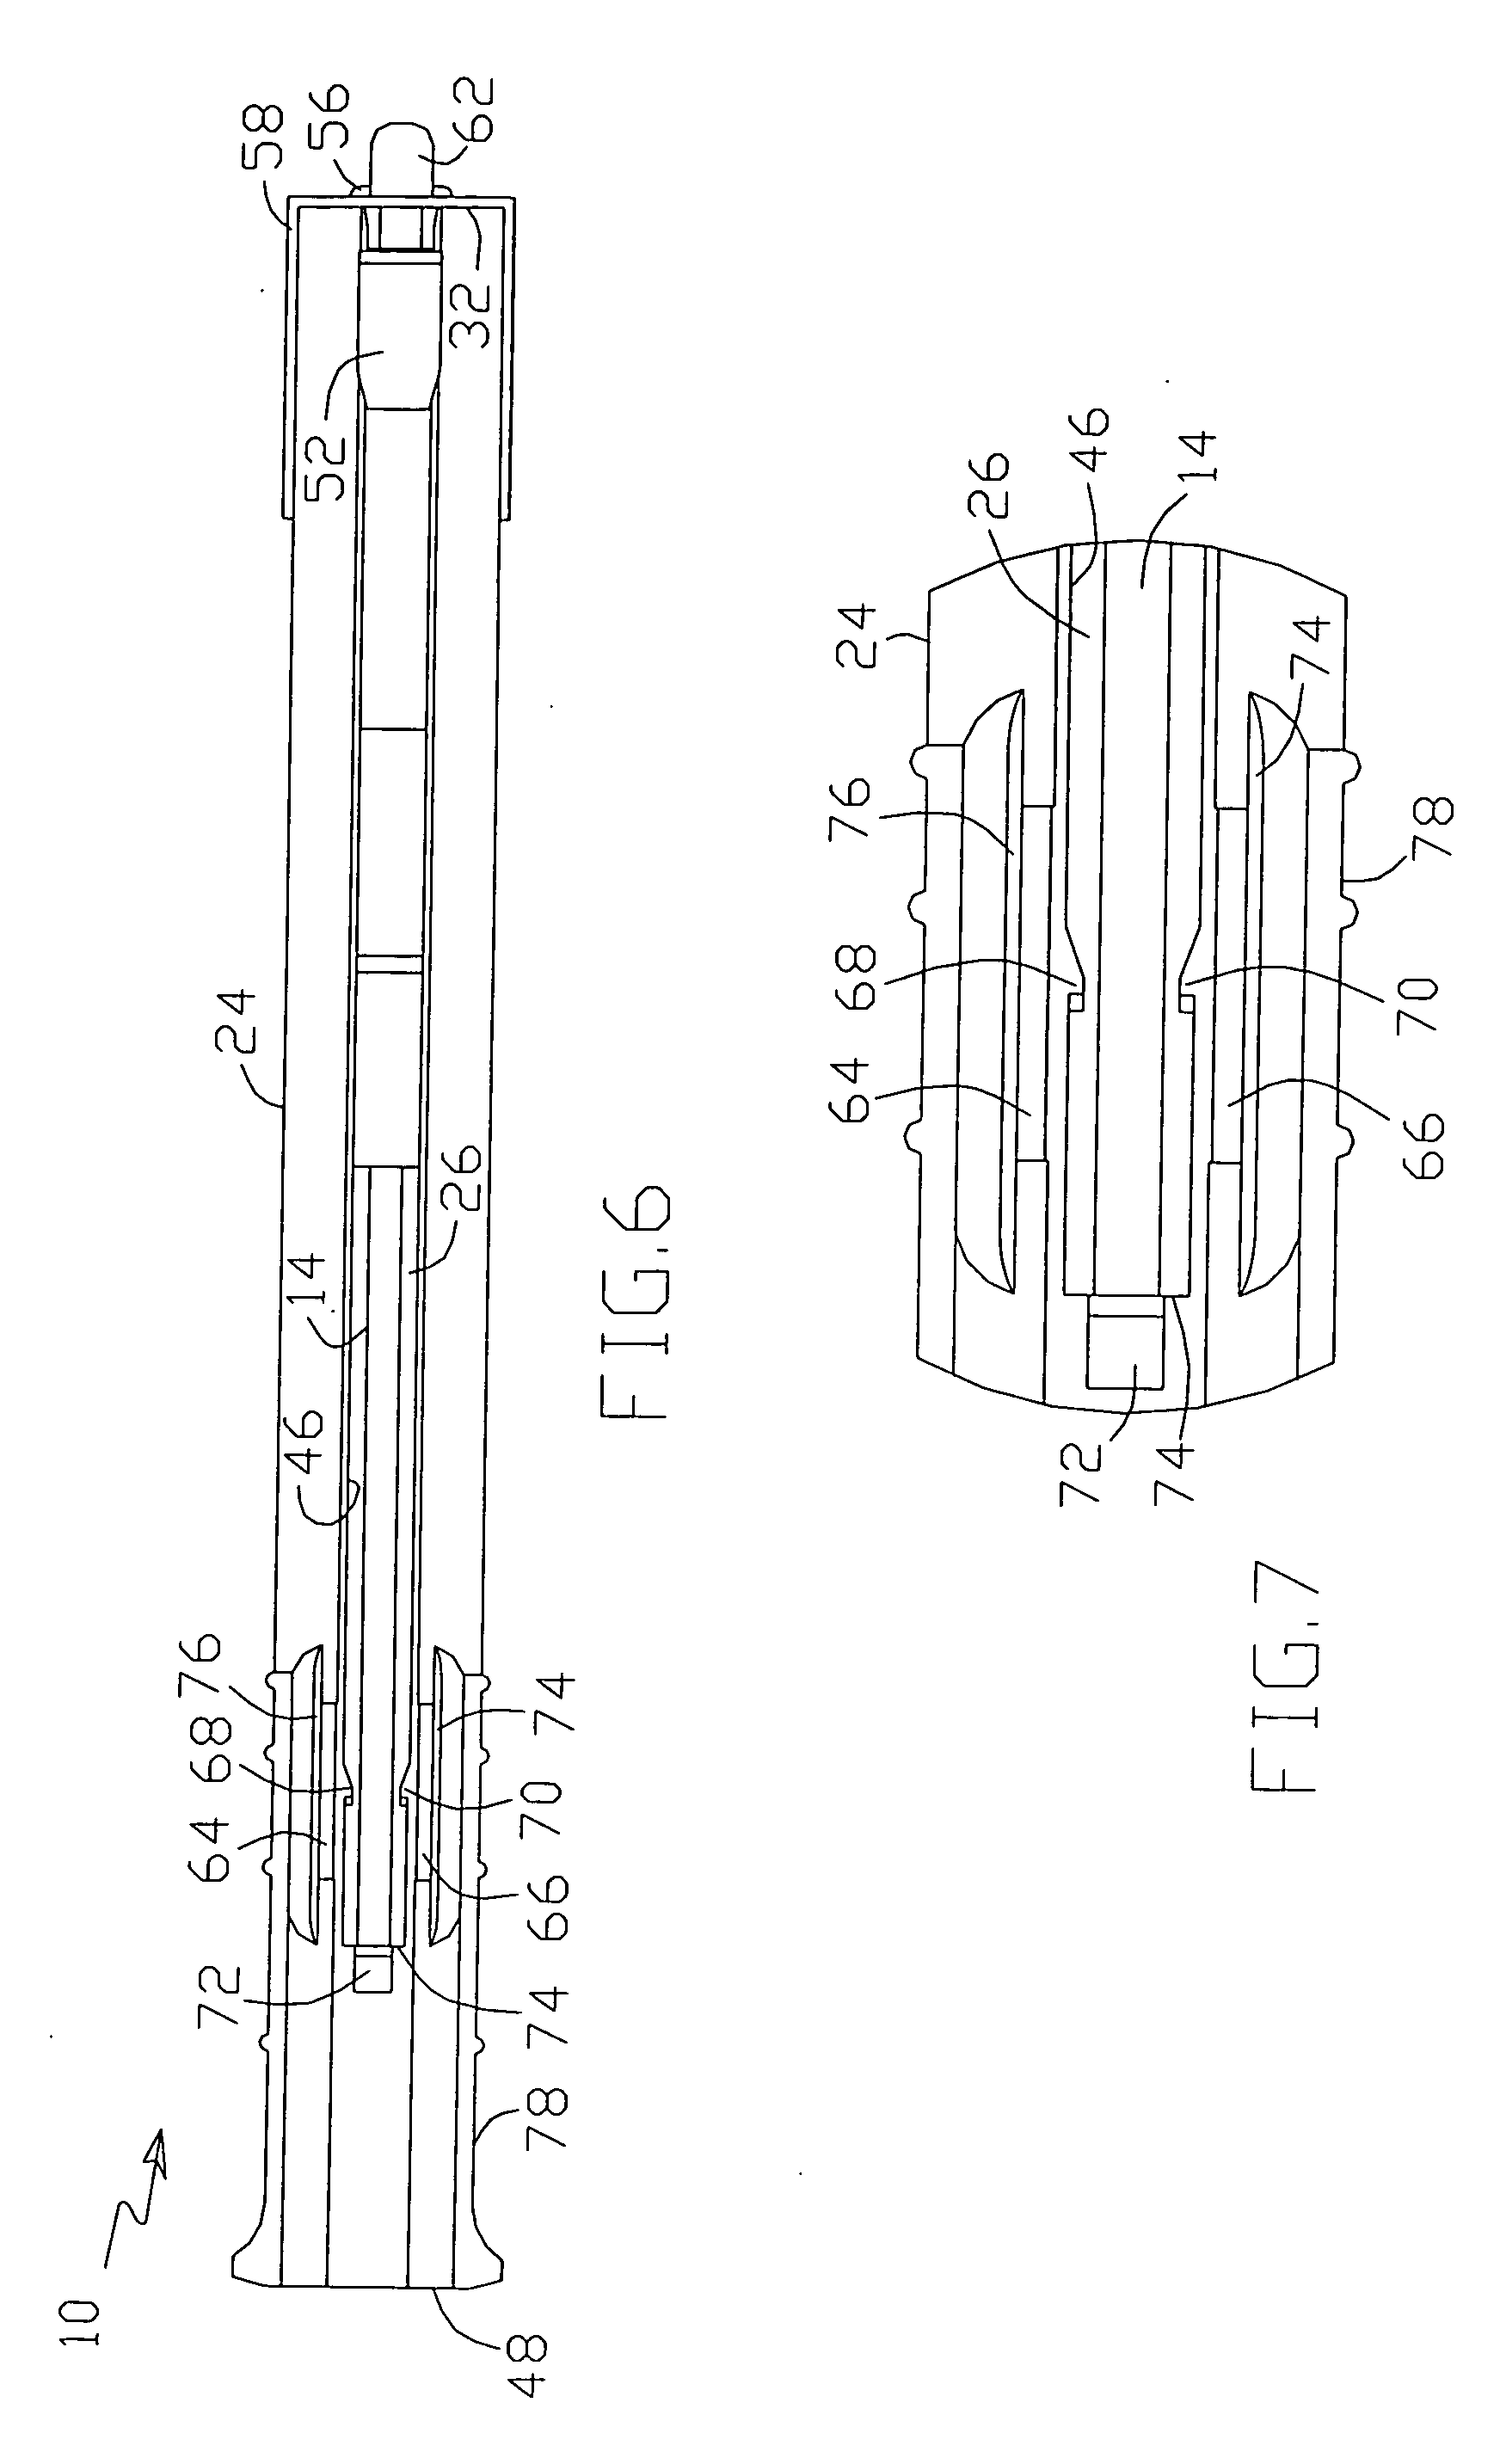 Catheter insertion apparatus with a needle tip protective system